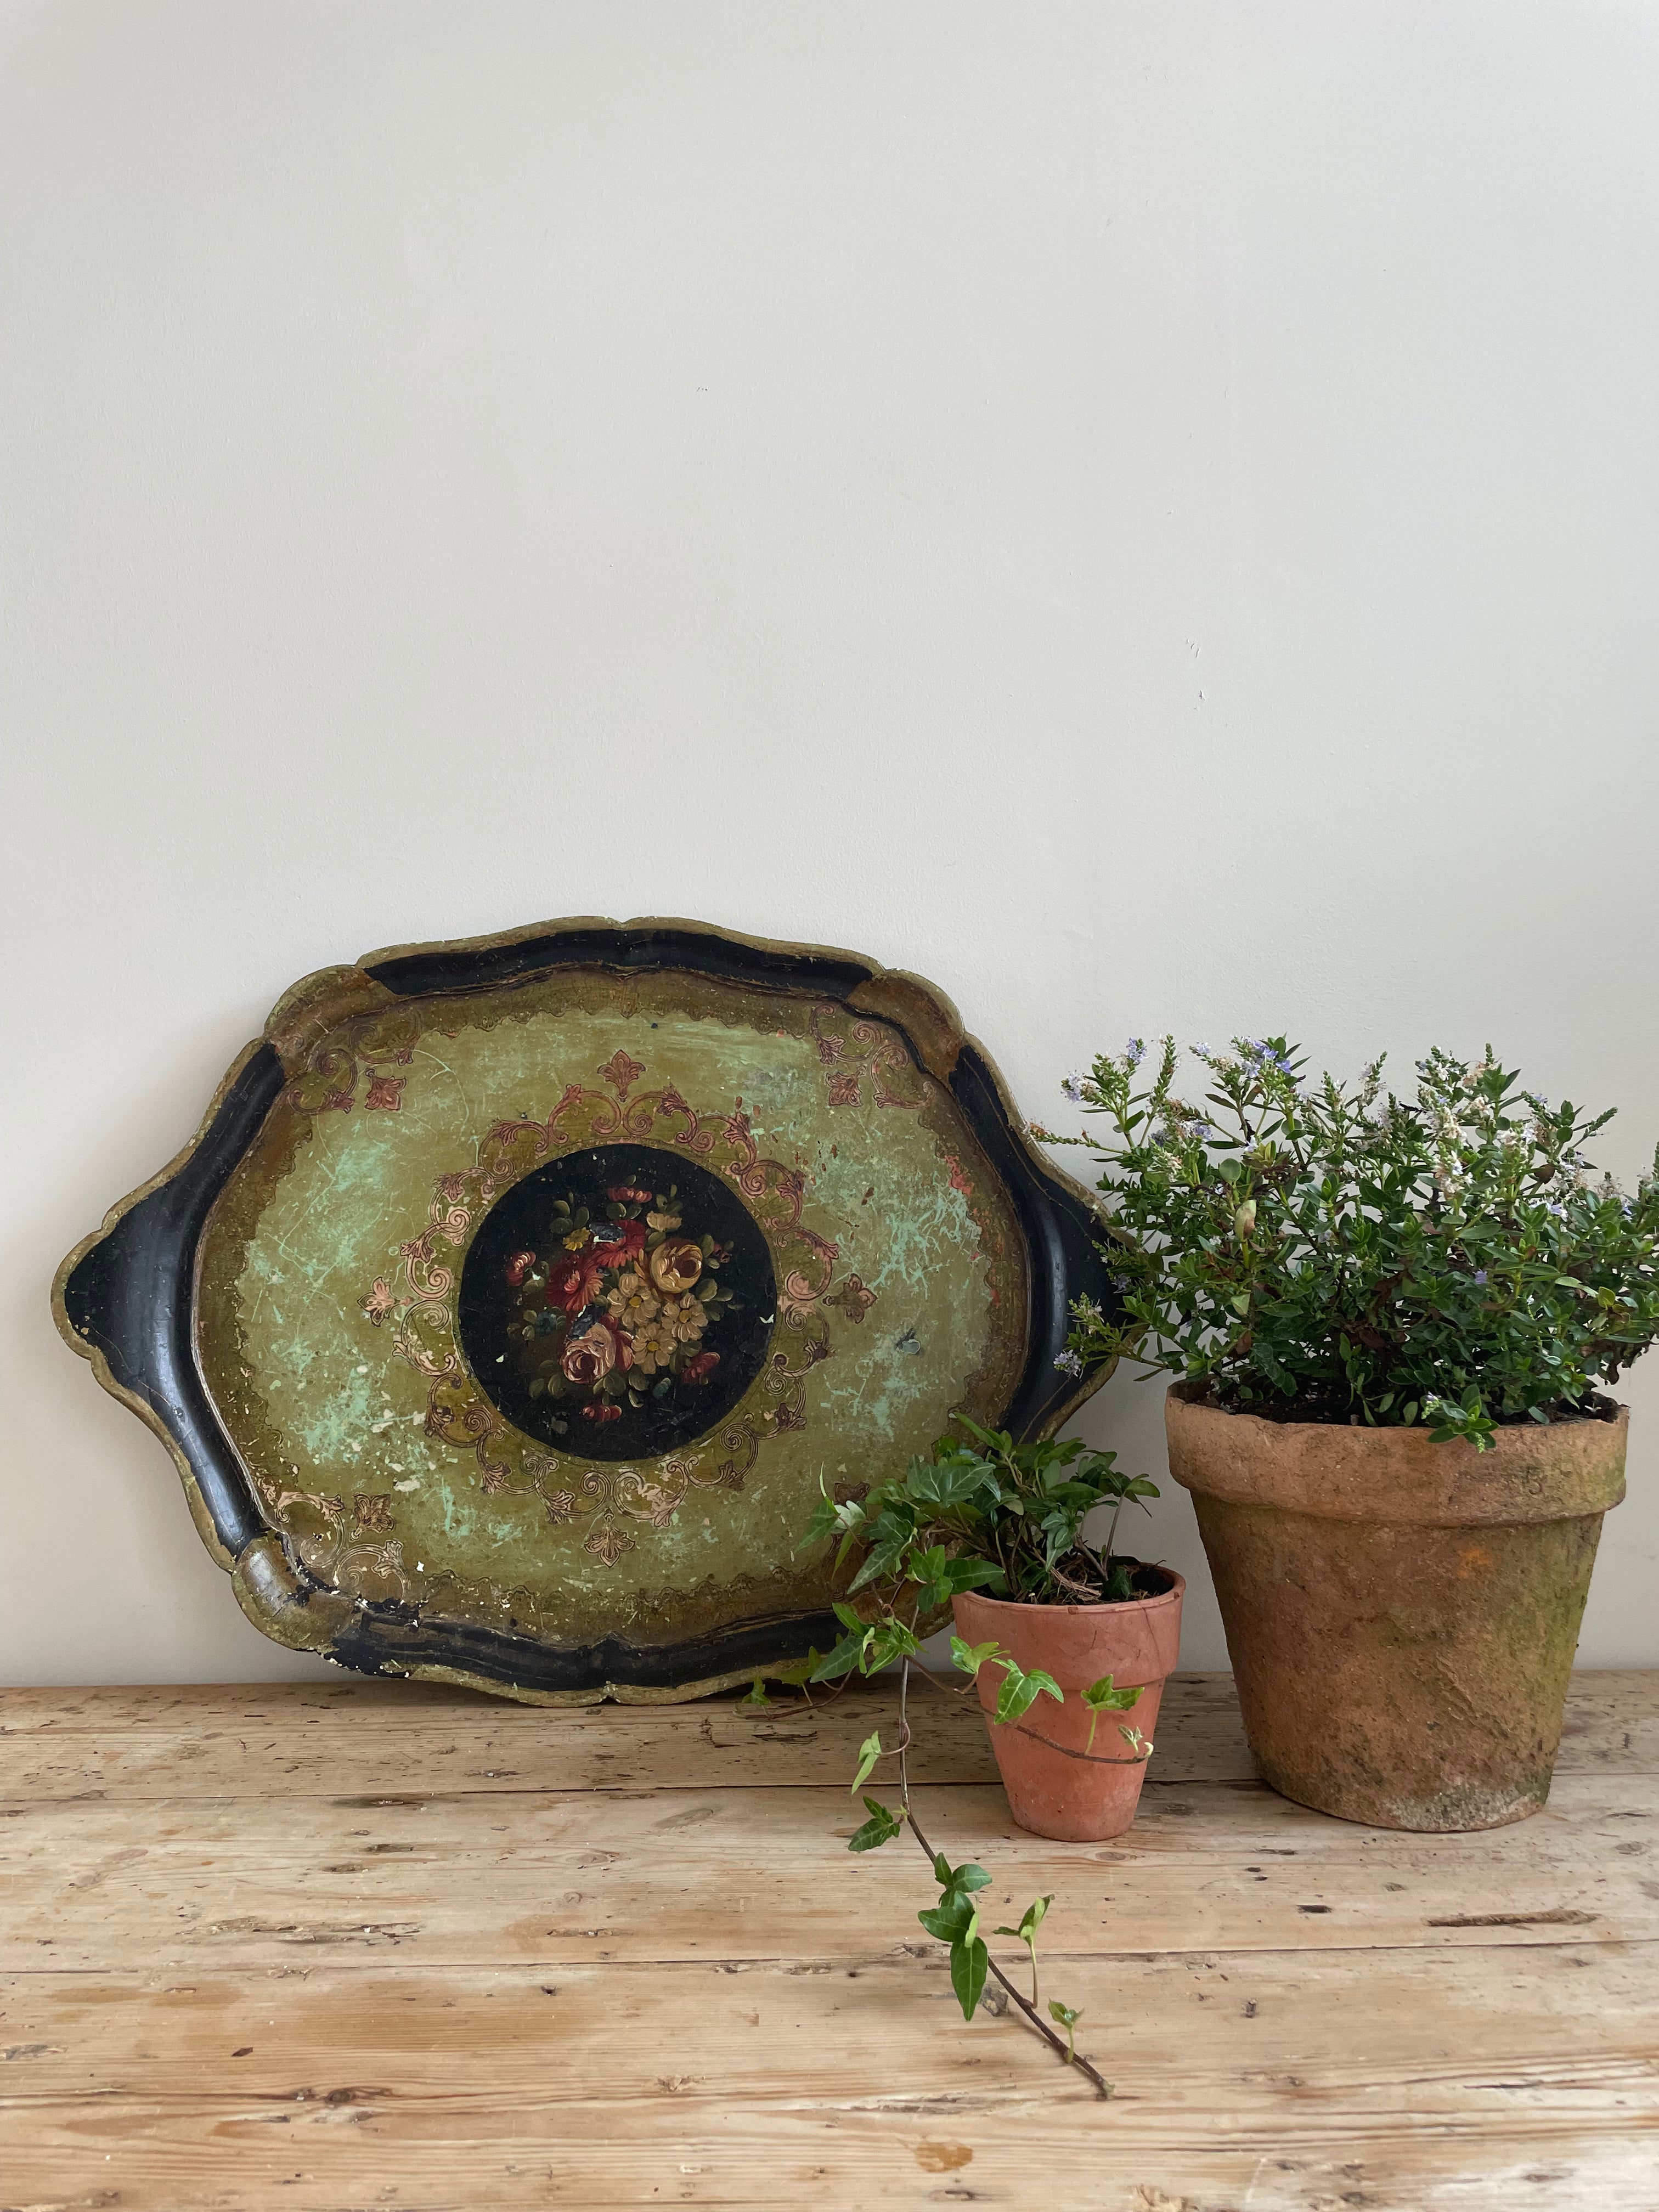 Florentine Tray with black and green florals